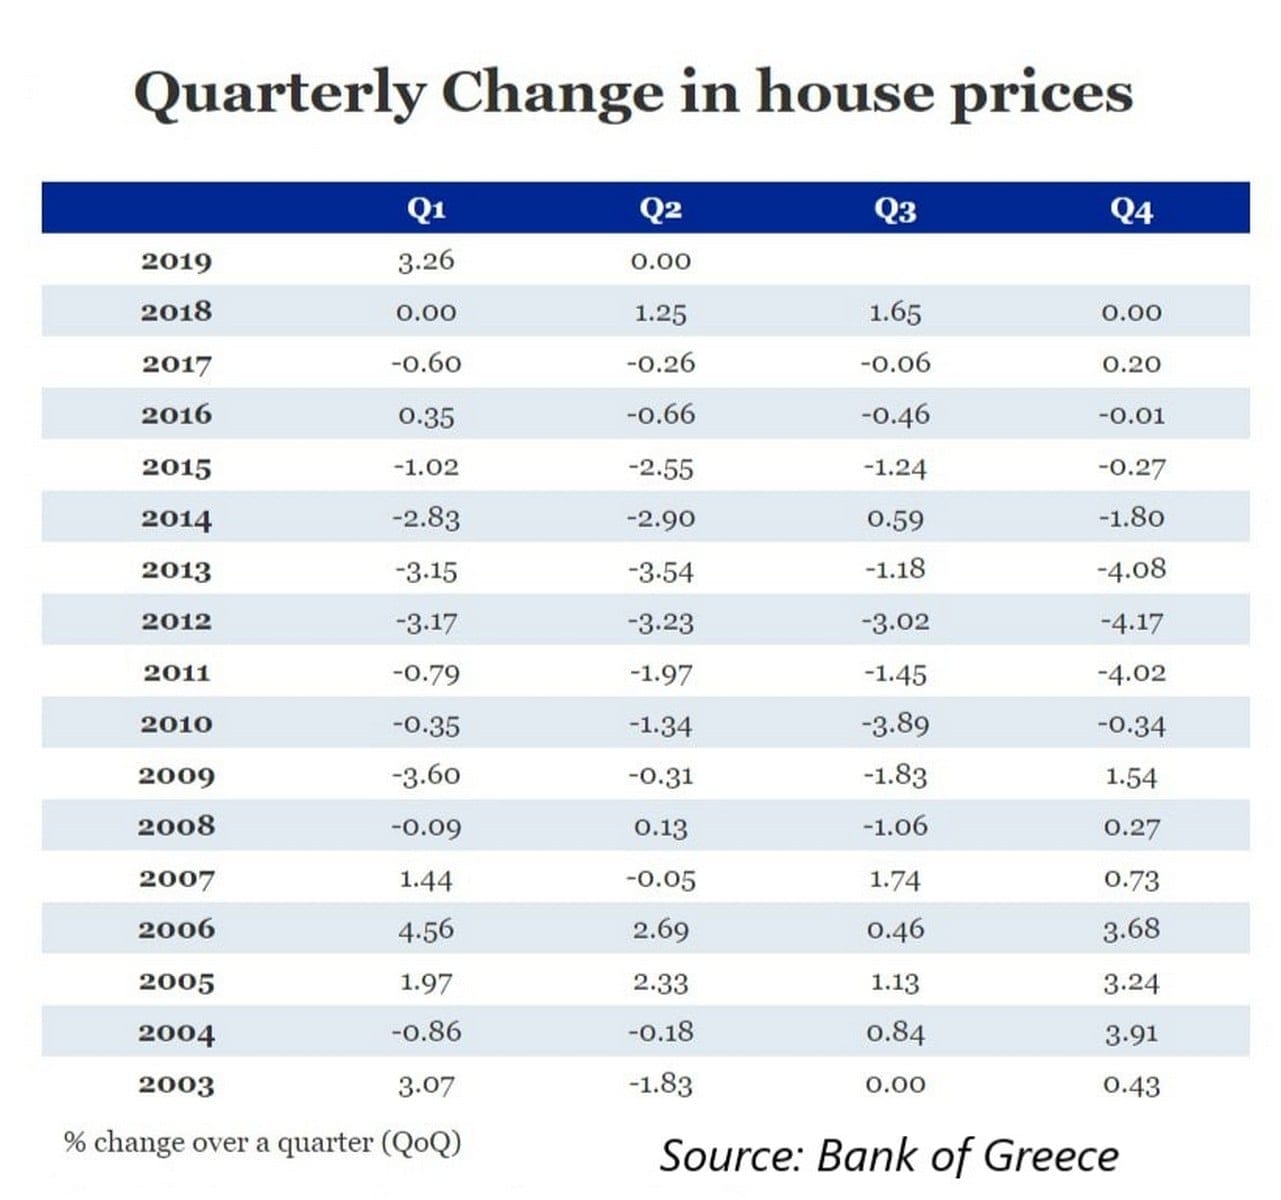 Quarterly Change in House Prices